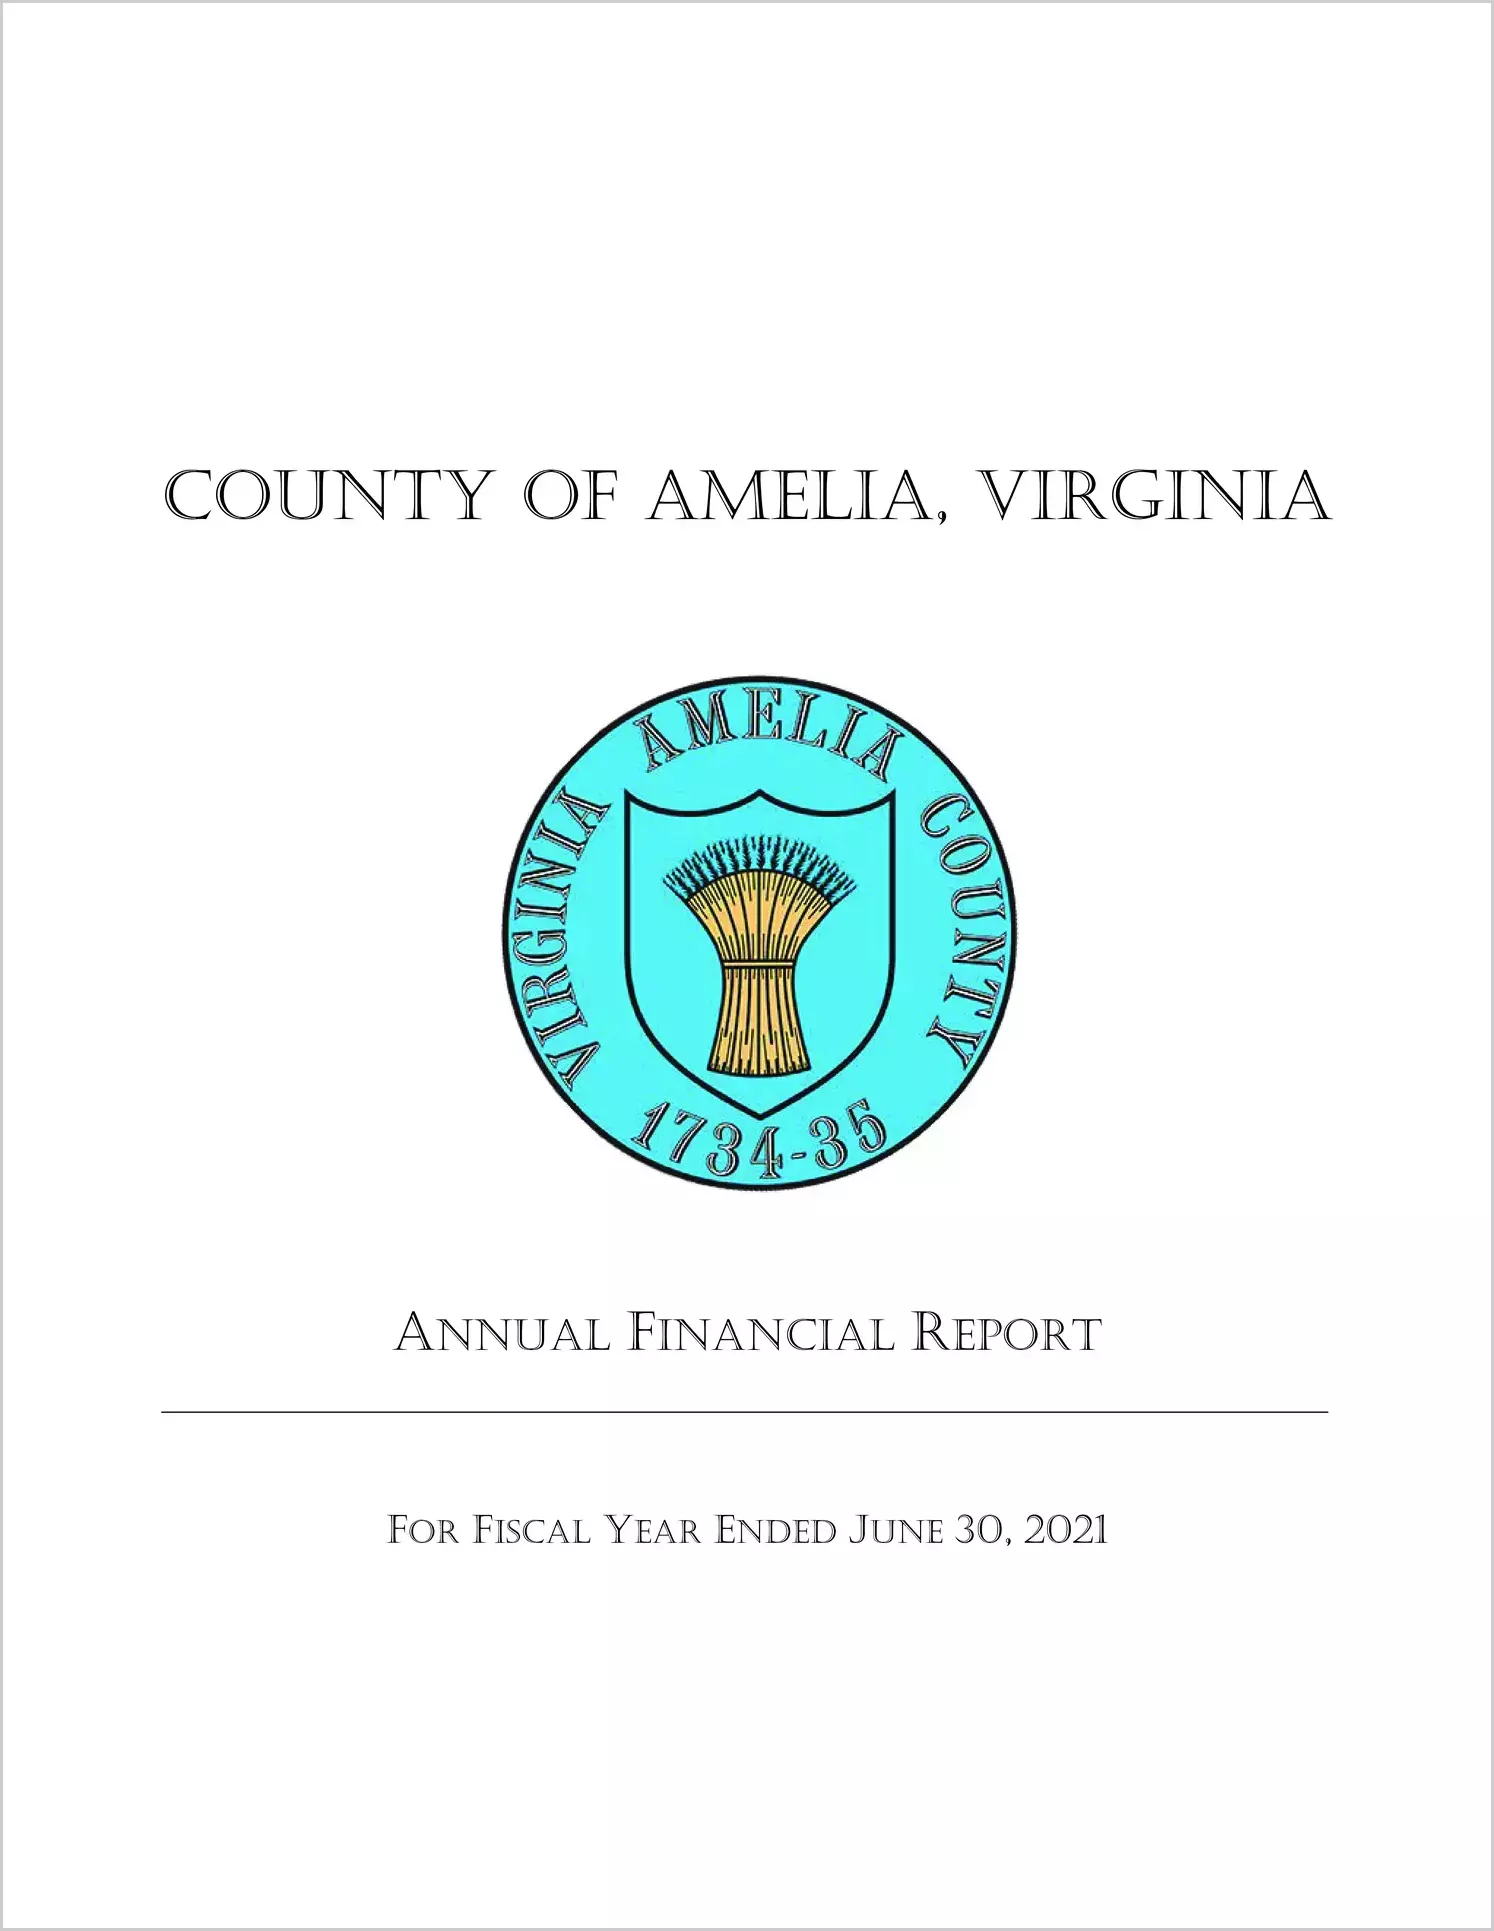 2021 Annual Financial Report for County of Amelia